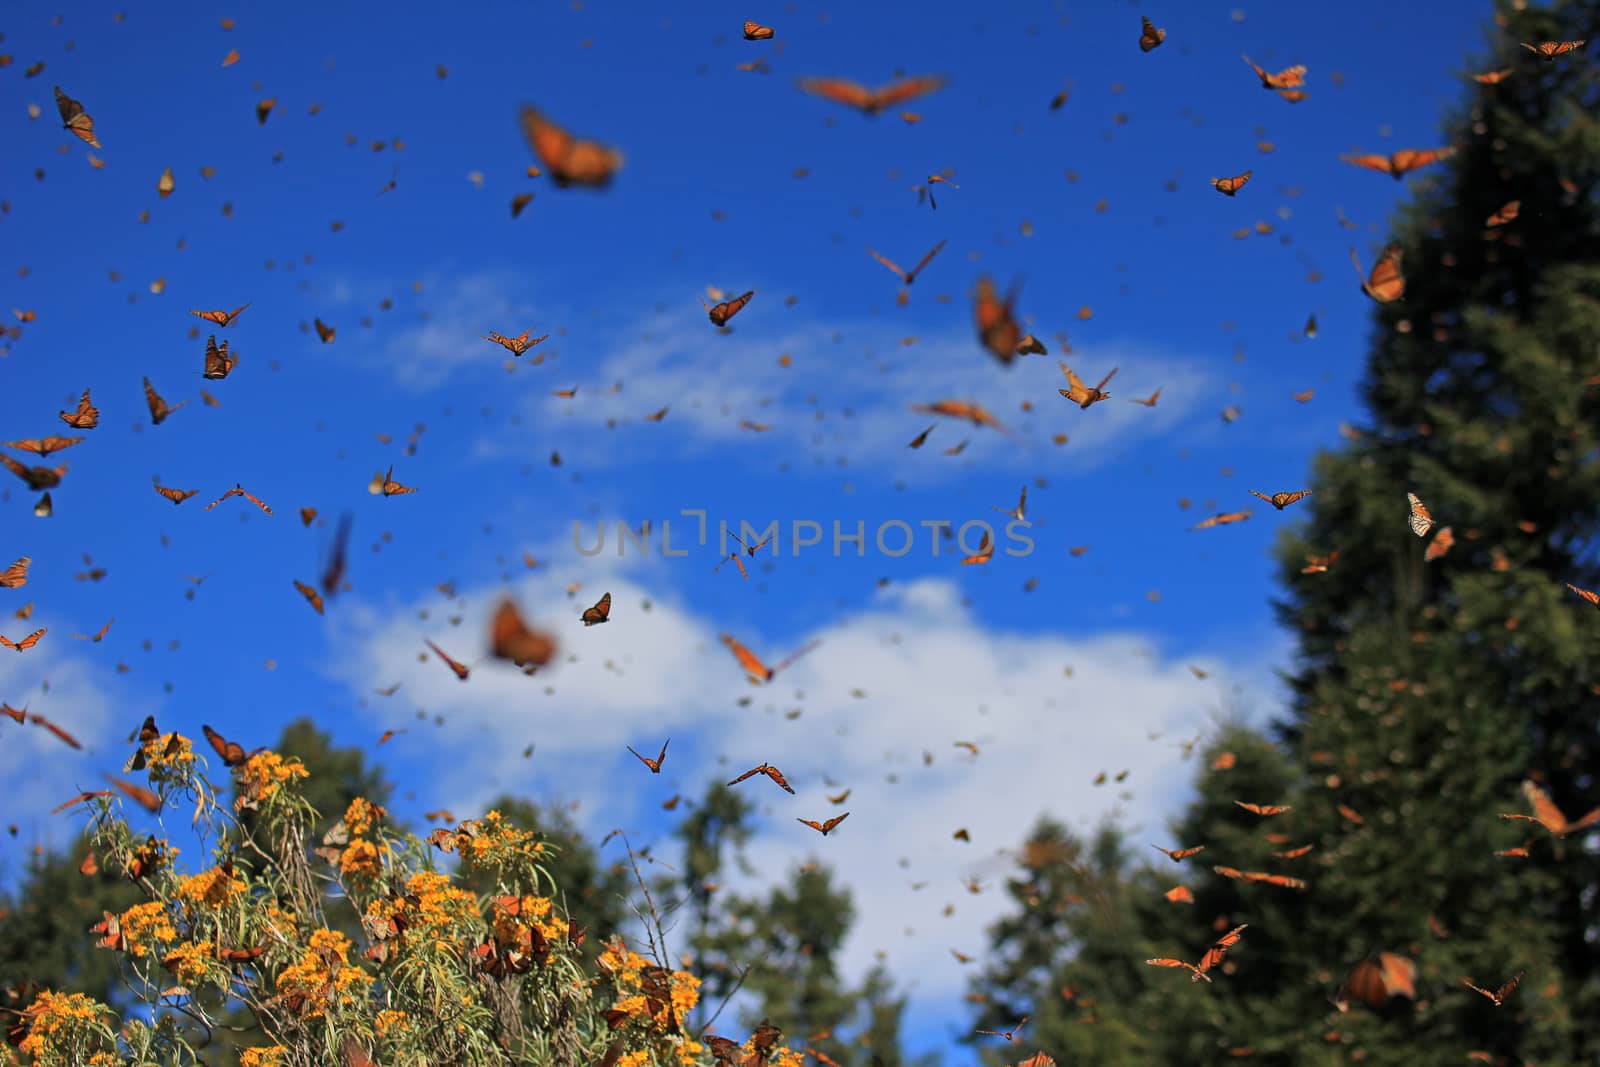 Monarch Butterflies in Michoacan, Mexico, millions are migrating every year and waking up with the sun.